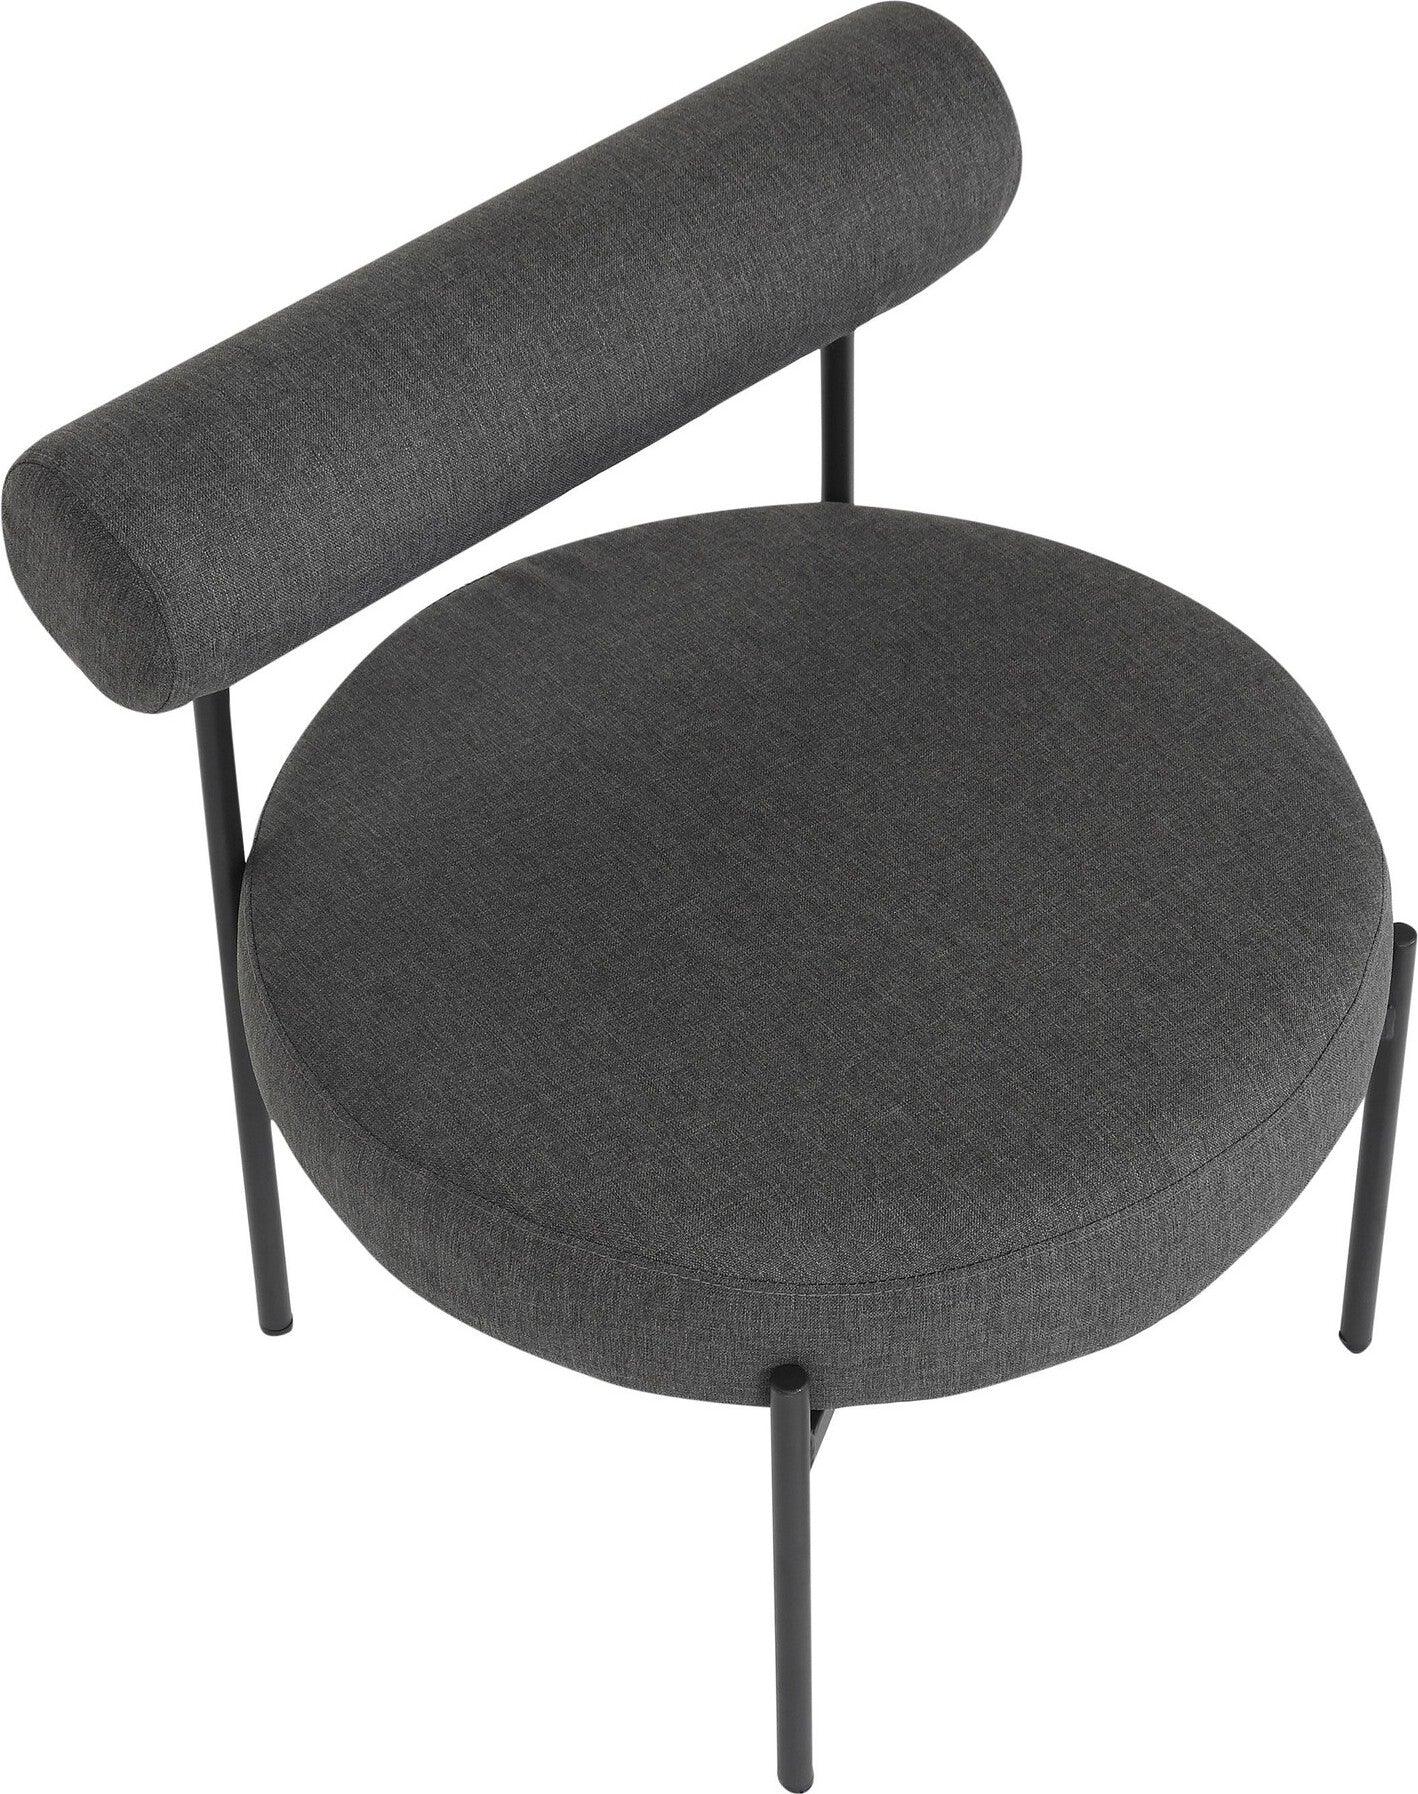 Lumisource Accent Chairs - Rhonda Accent Chair Black & Charcoal